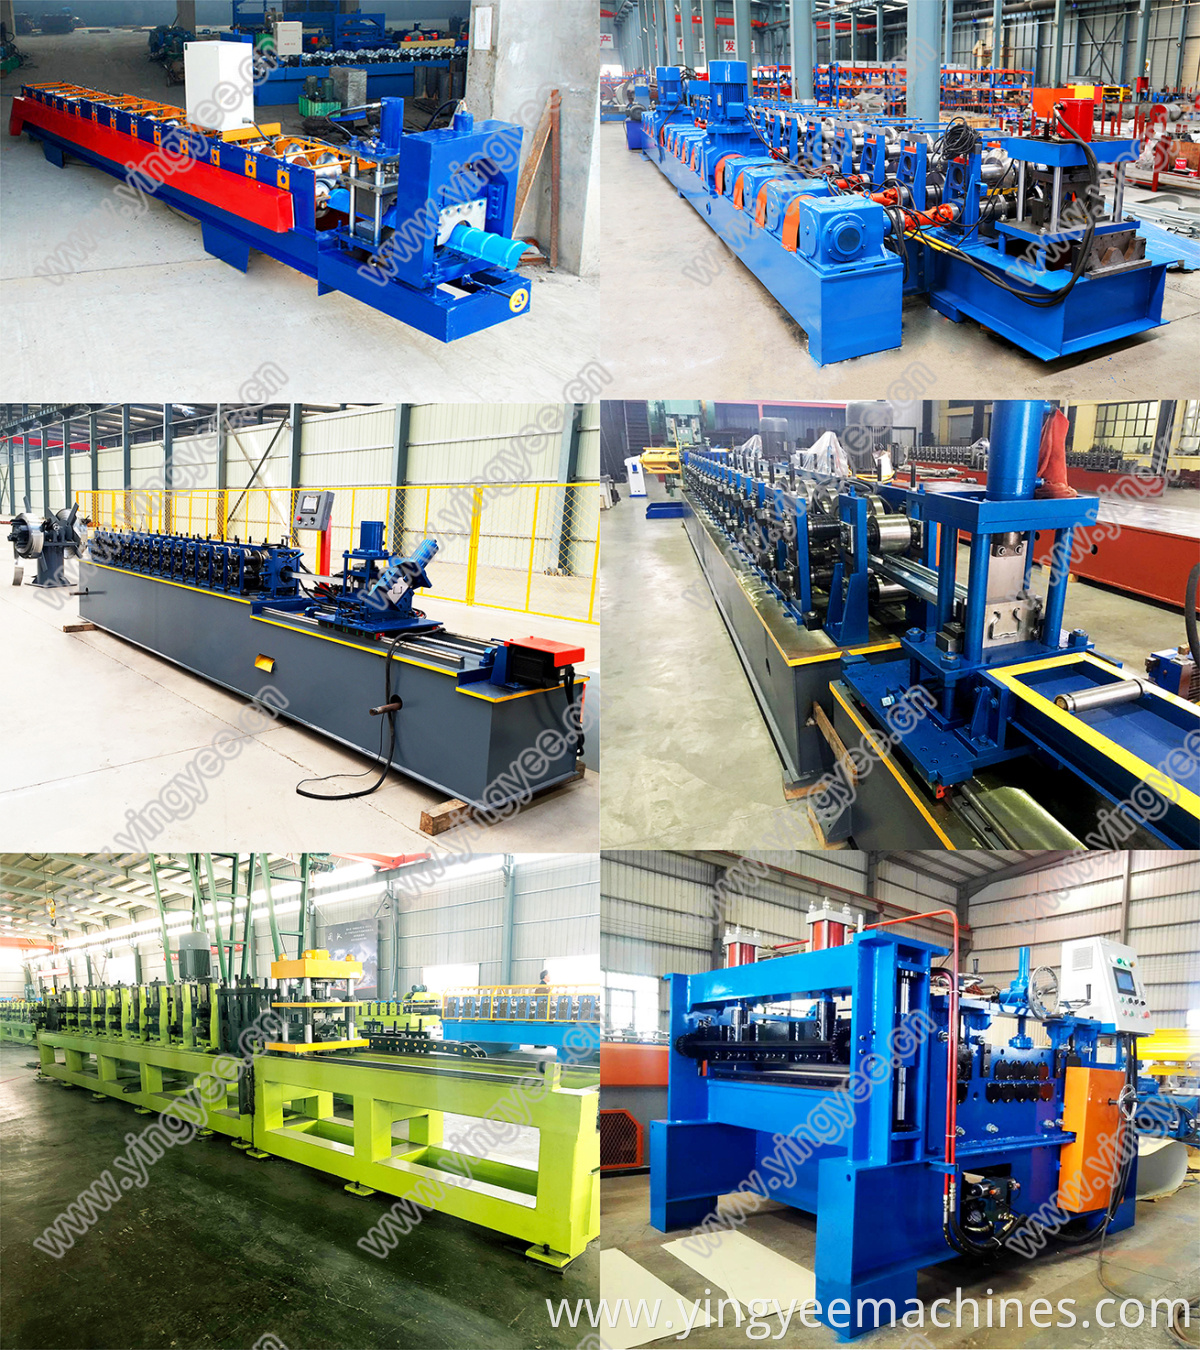 Aluminum water downpipe making machine/ downsprout pipe making machine with flying soar cutter